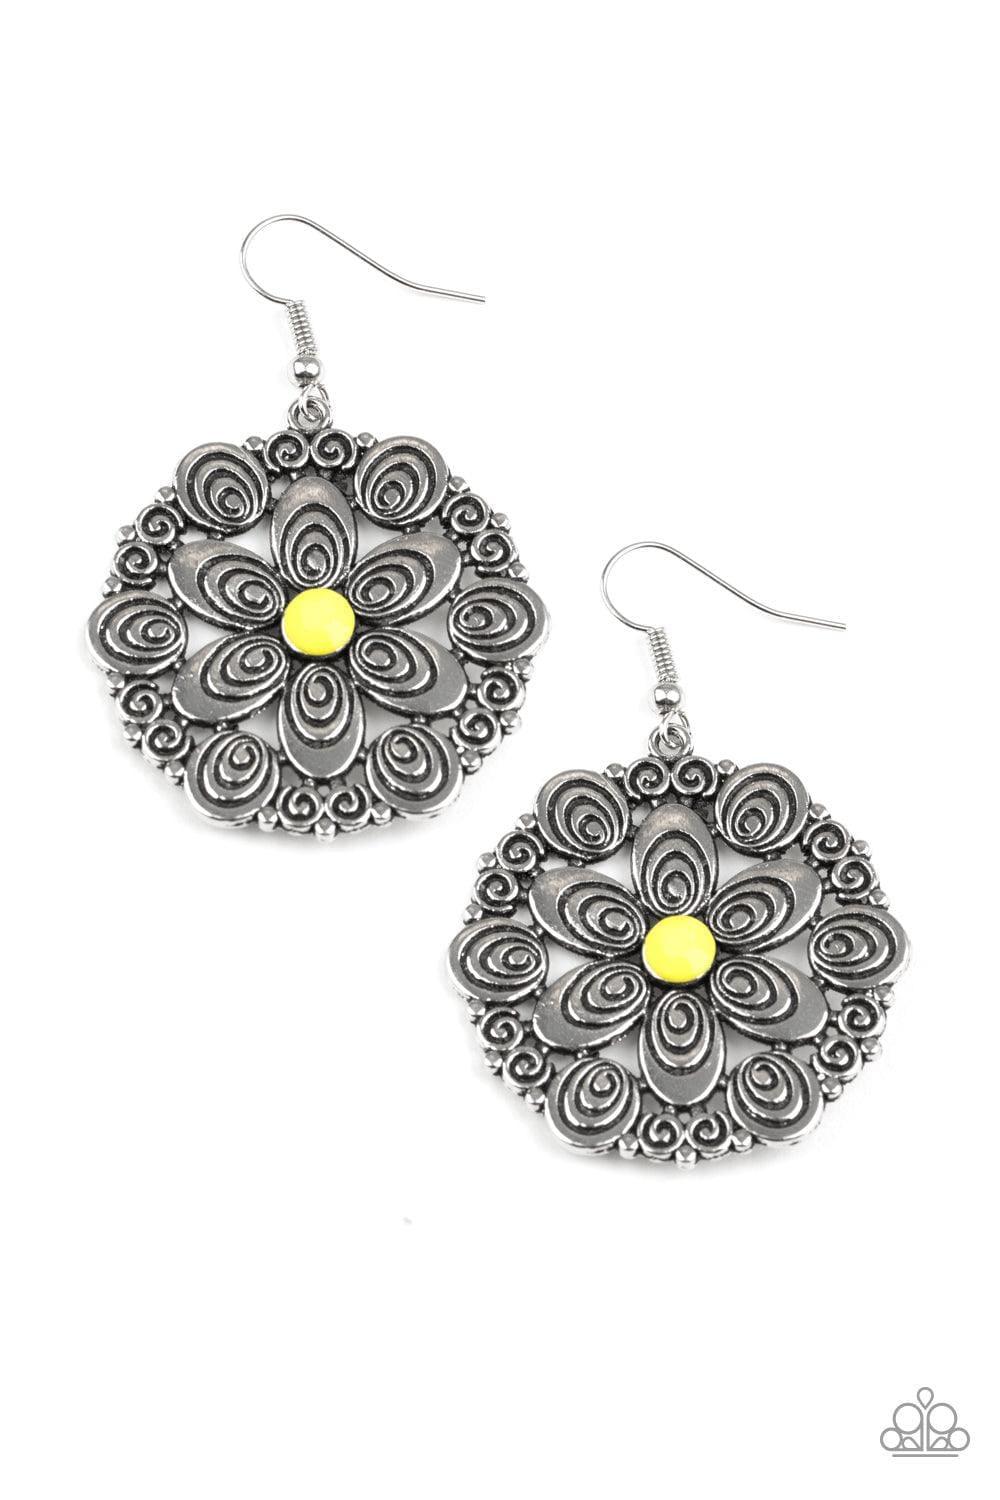 Paparazzi Accessories - Grove Groove - Yellow Earrings - Bling by JessieK